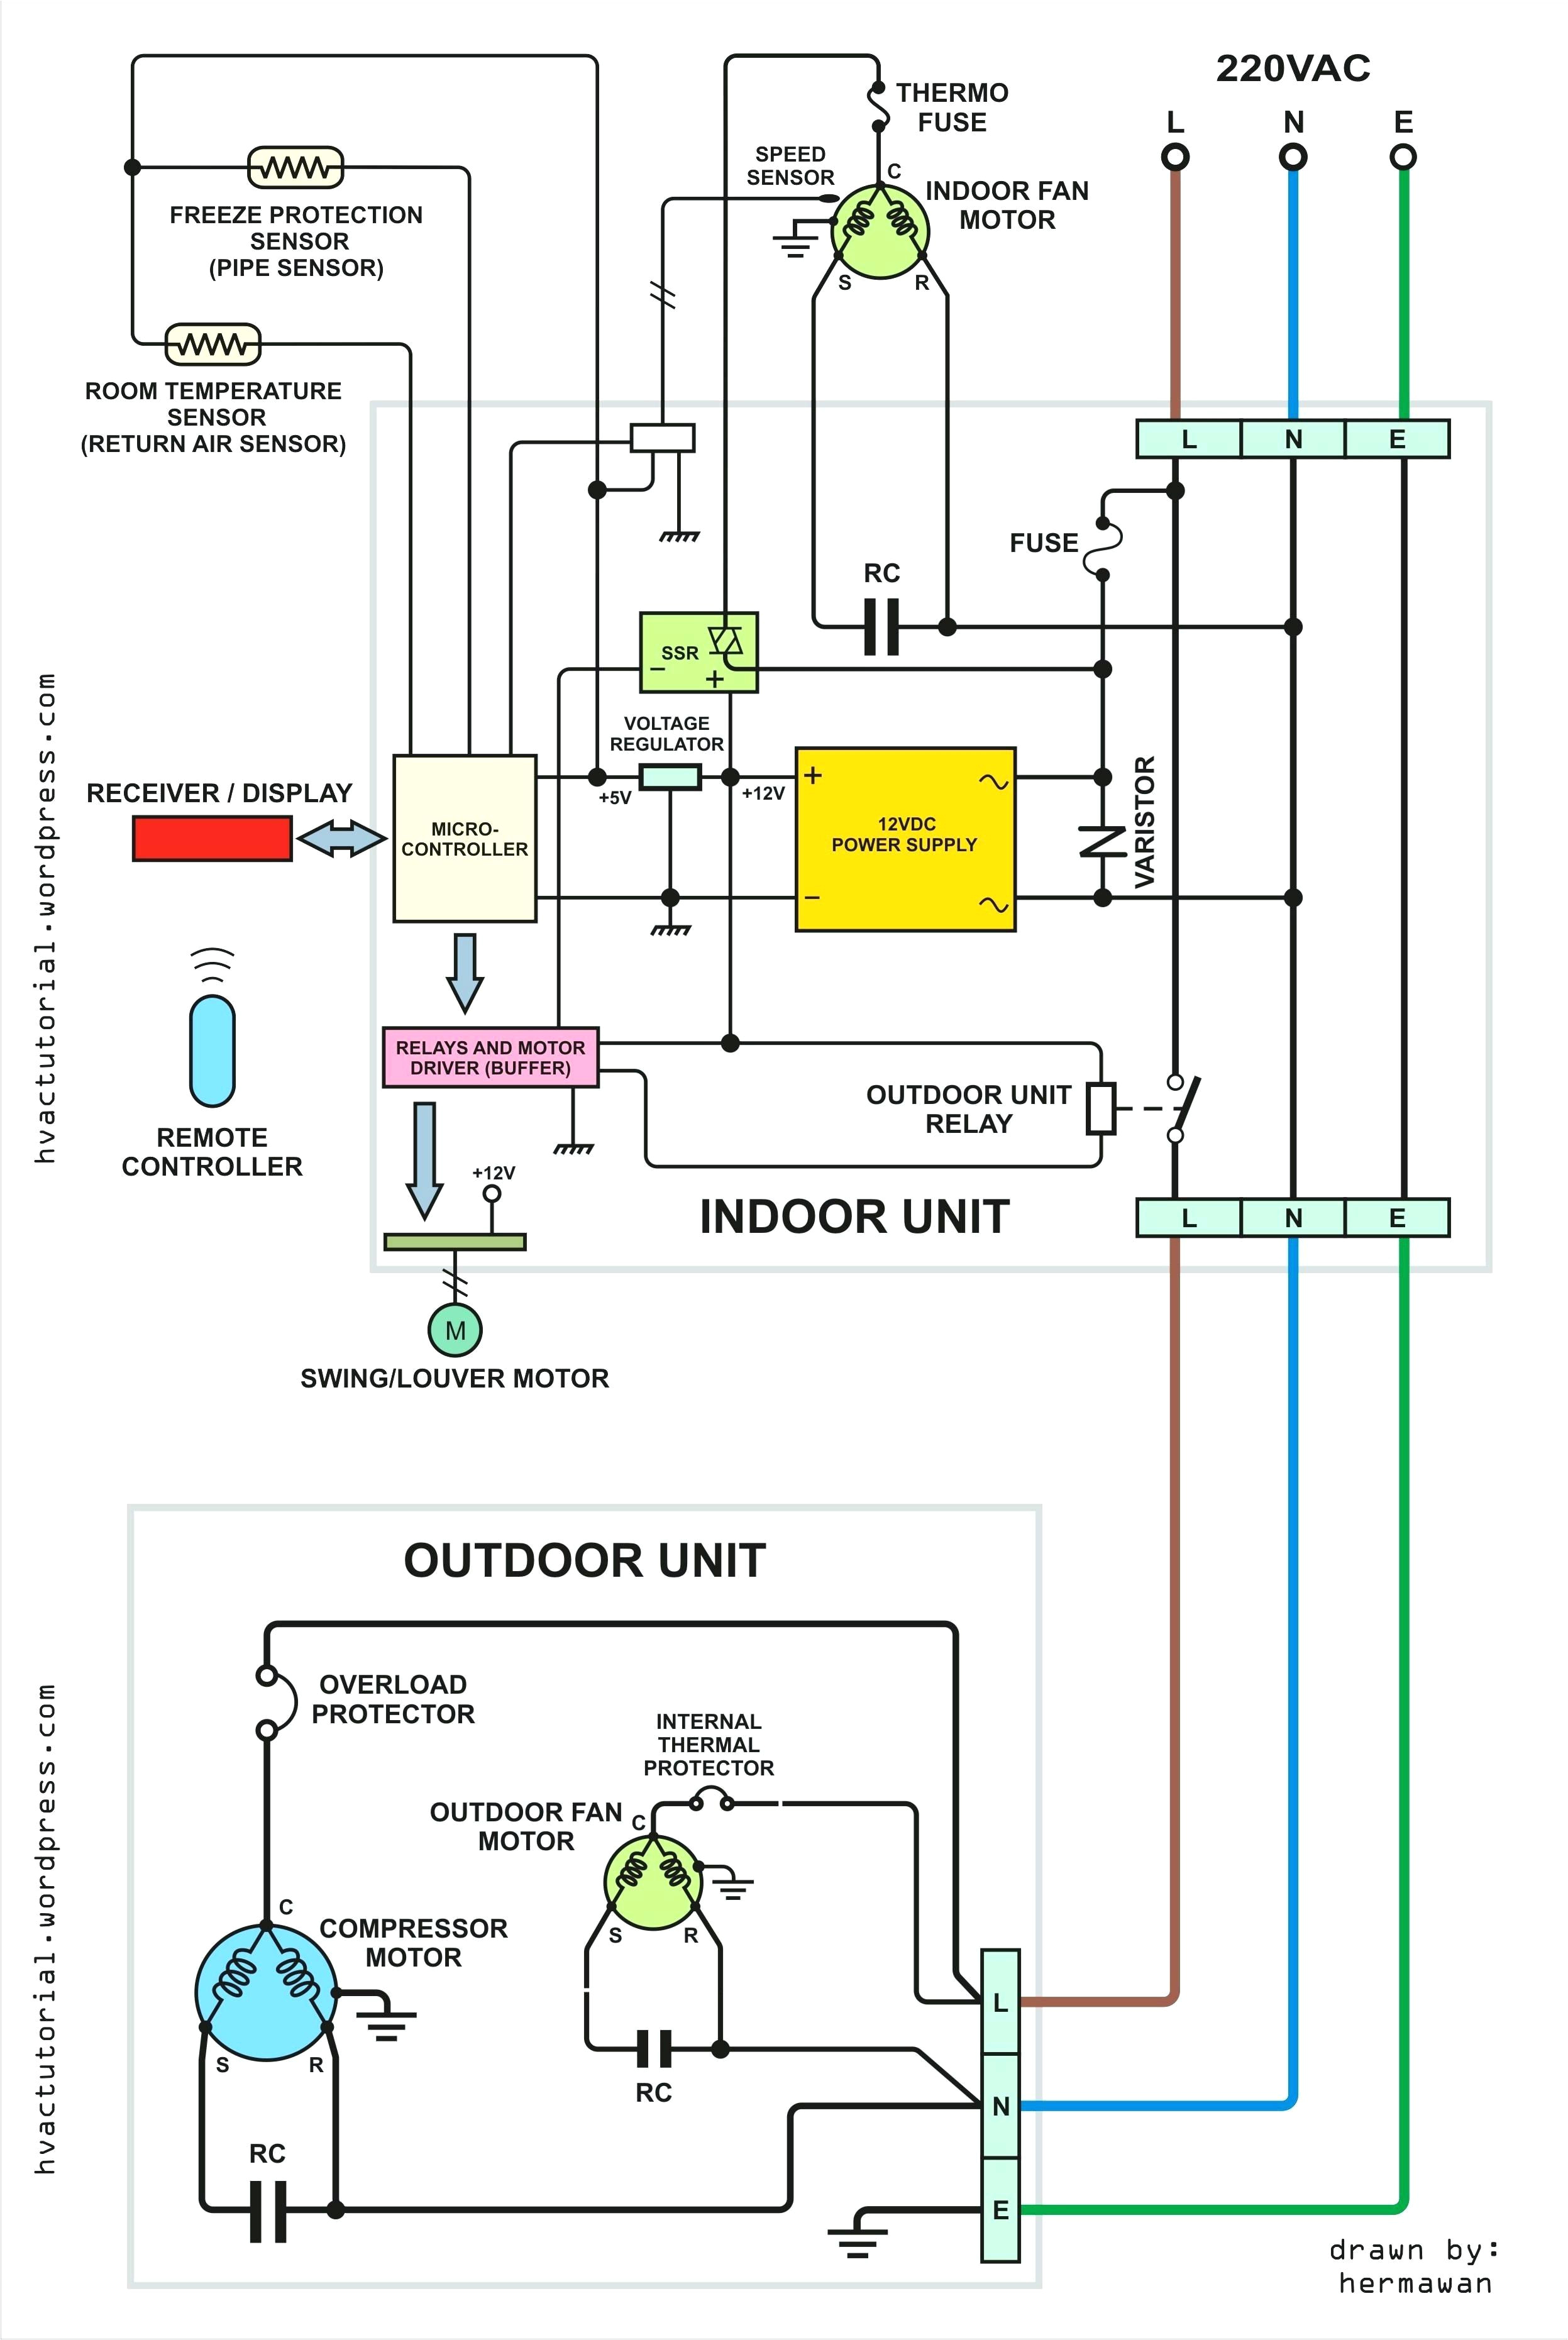 lennox furnace wiring diagram old thermostat me at unbelievable 11g 4 jpg